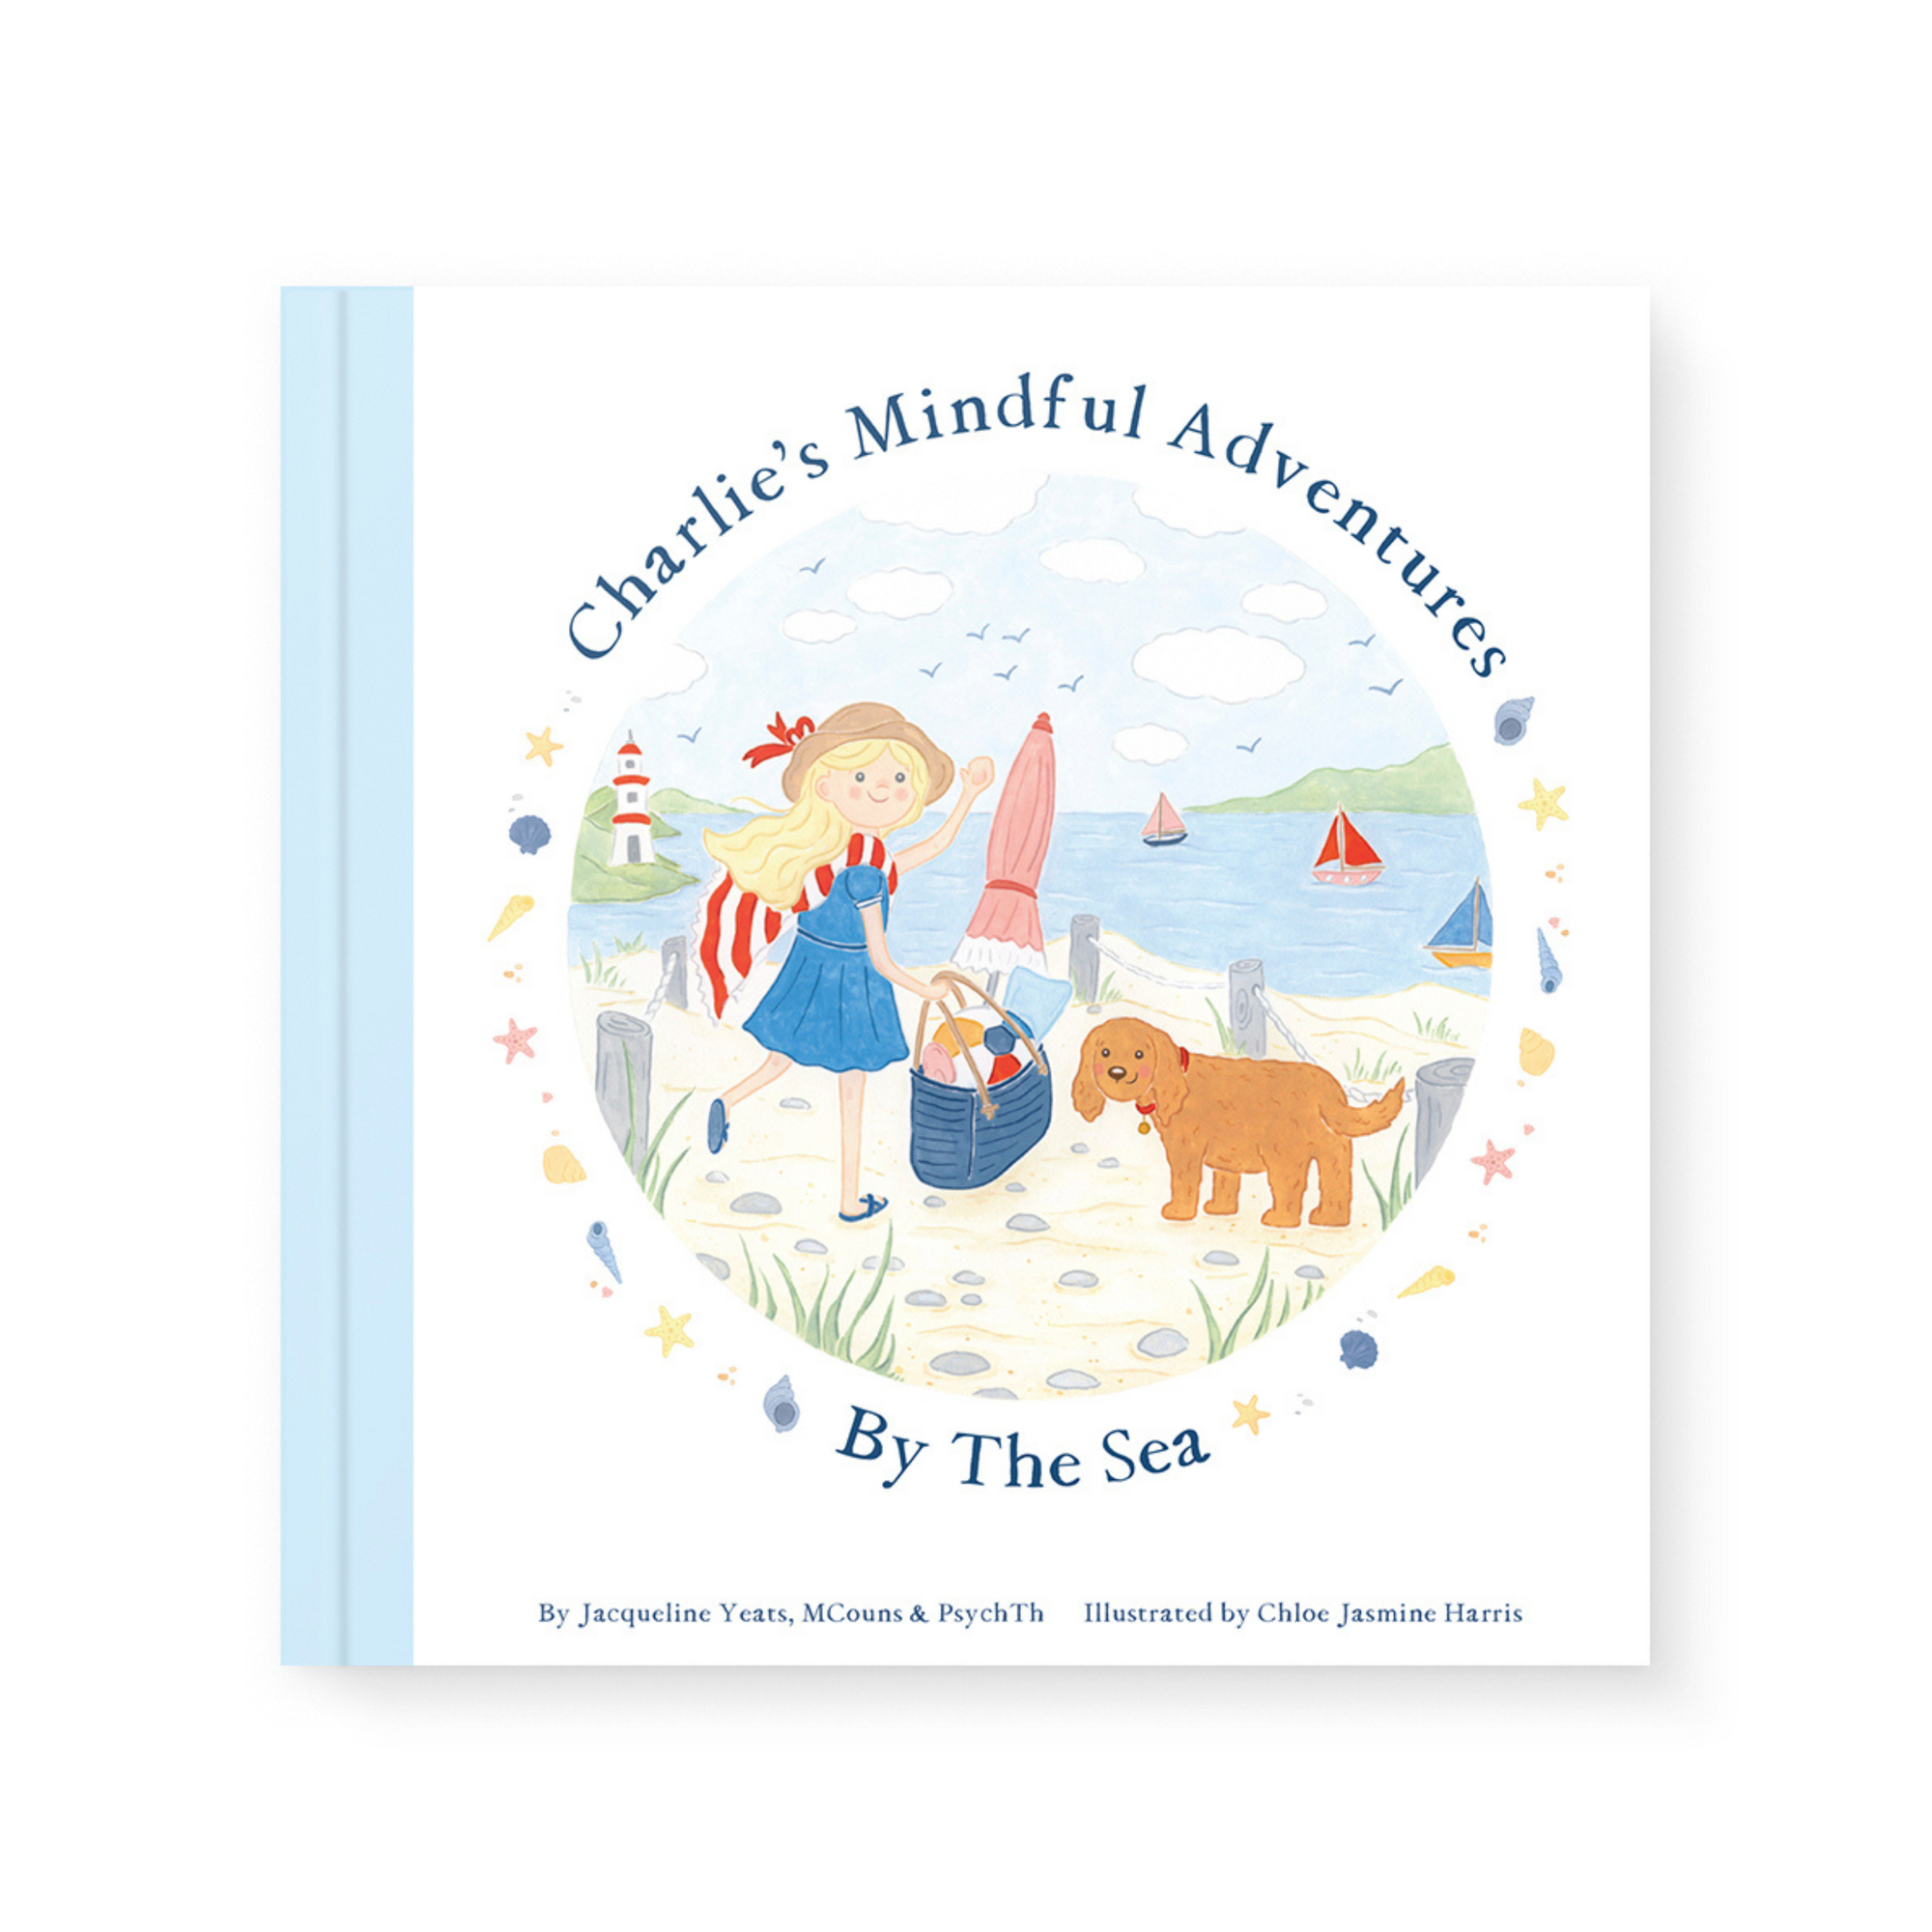 Charlie's Mindful Adventures By The Sea (New)